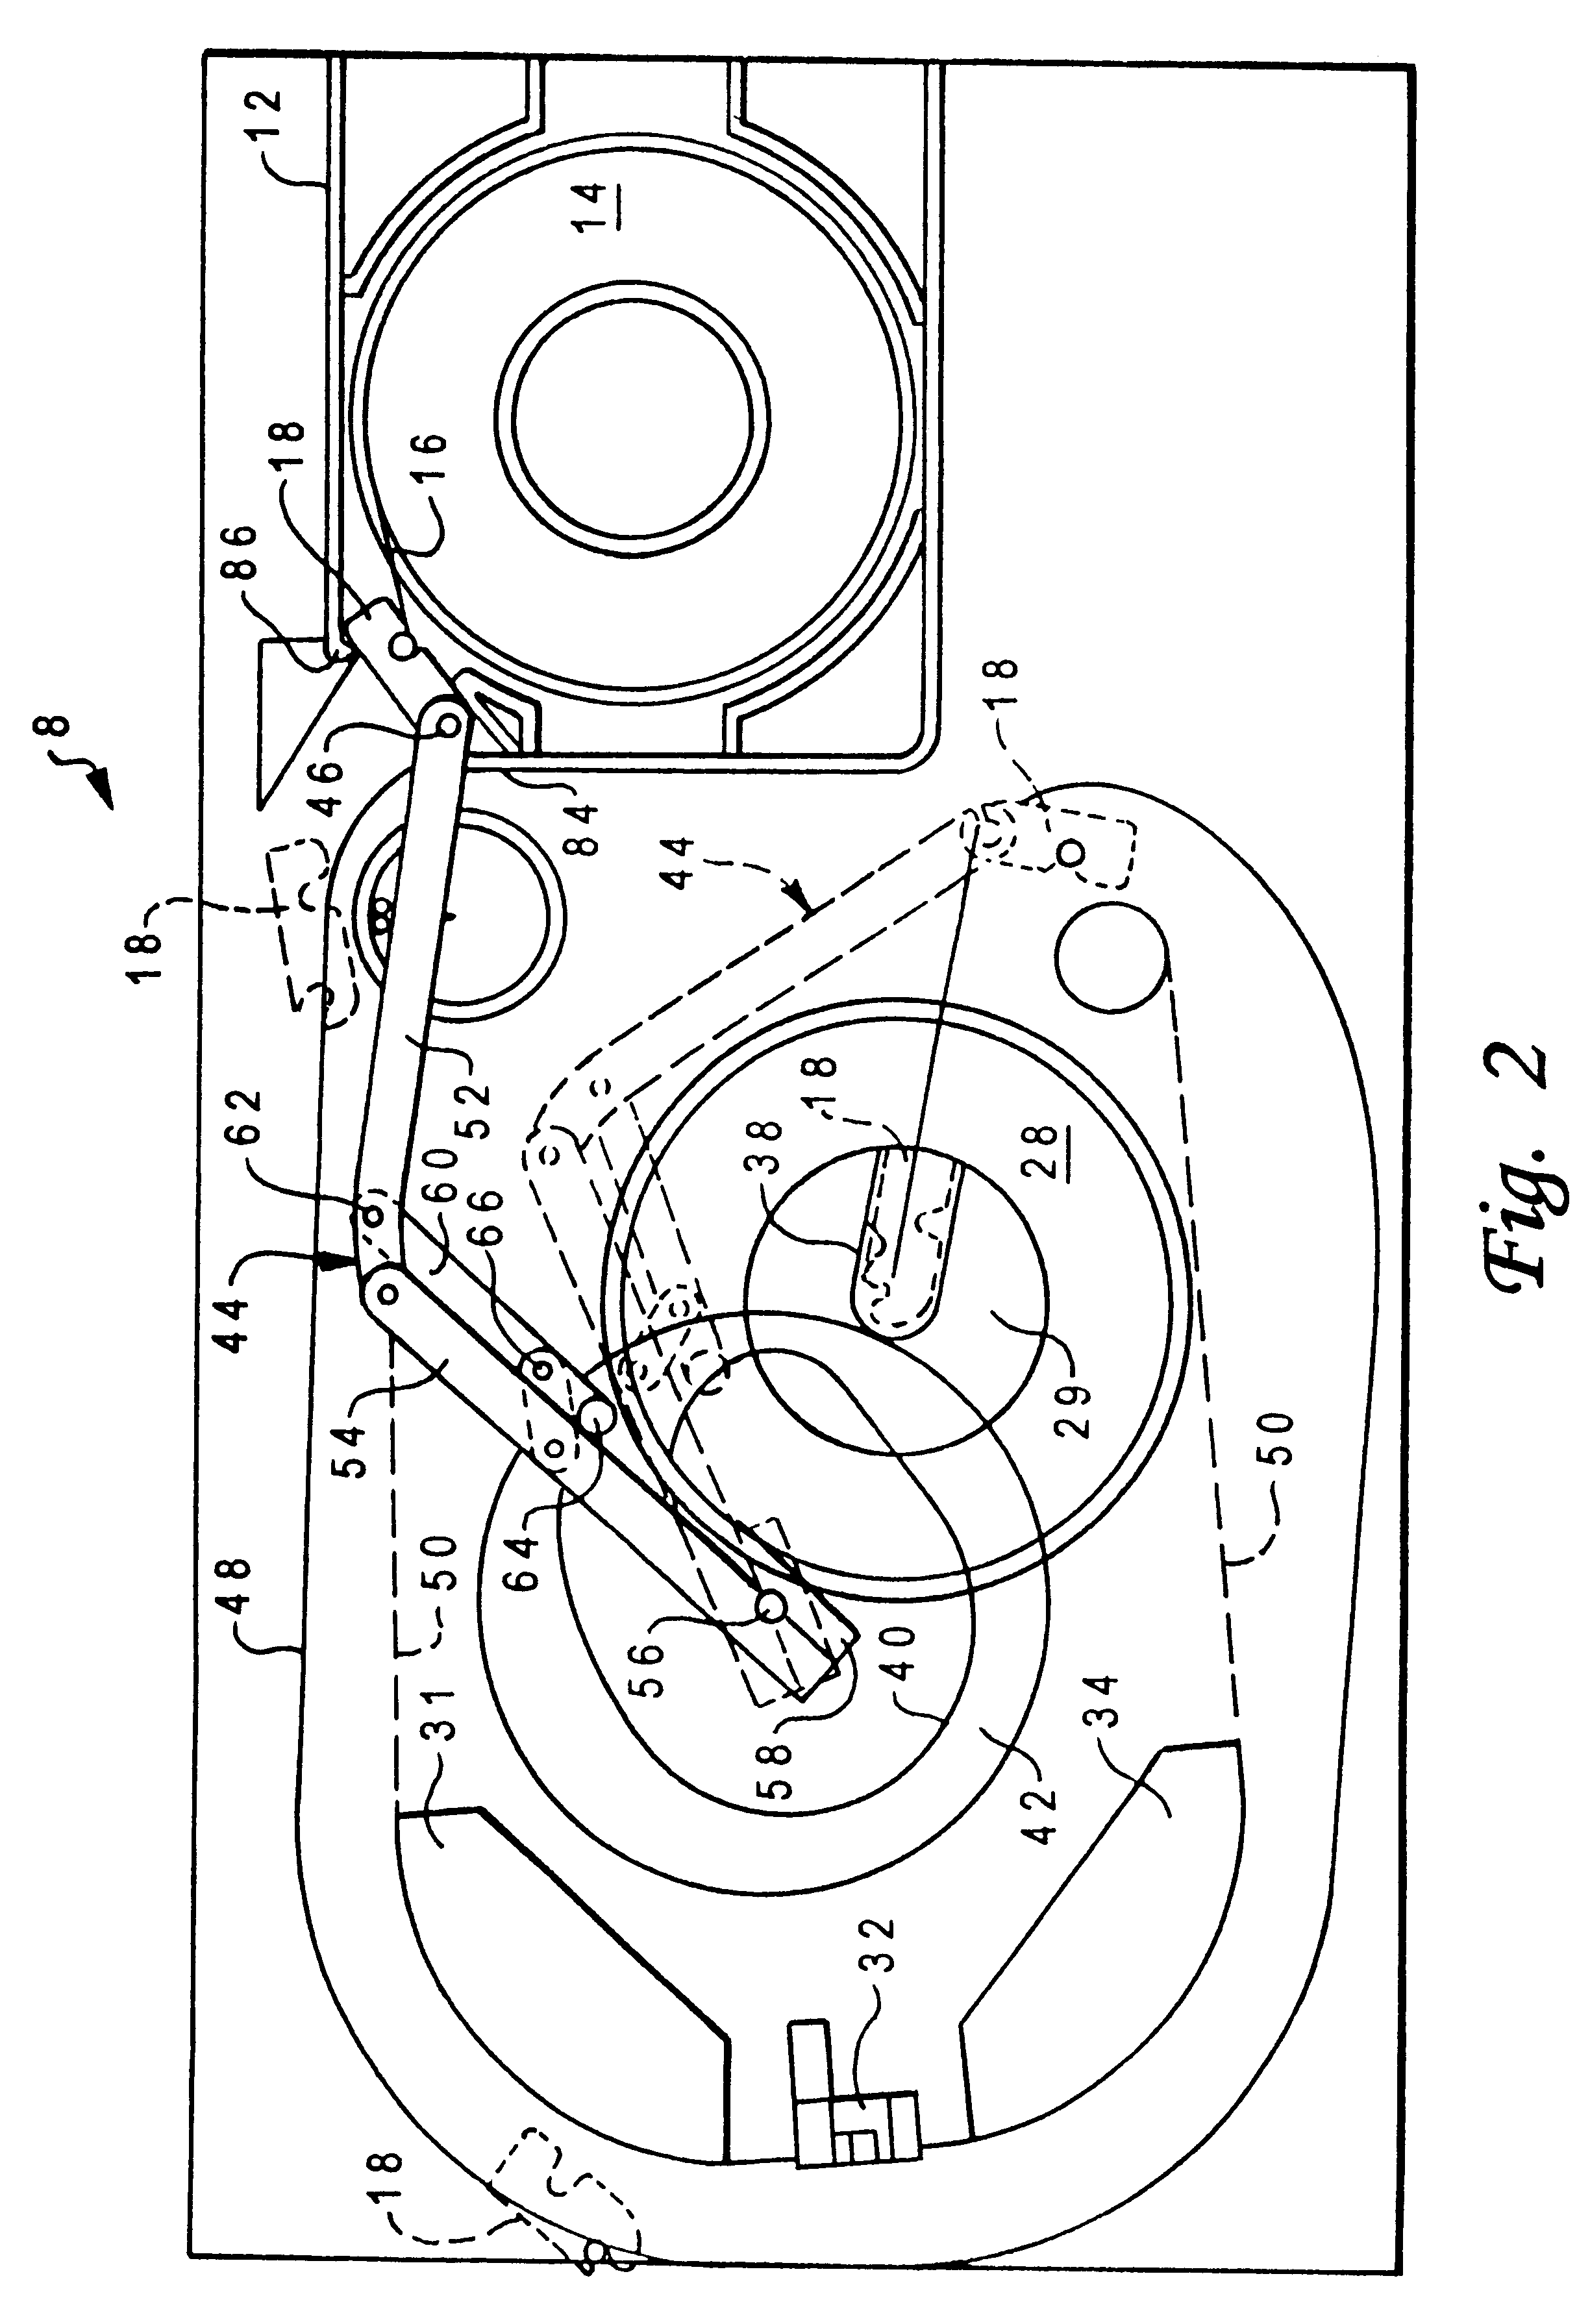 Method and system for detecting the end of a tape within a magnetic tape drive